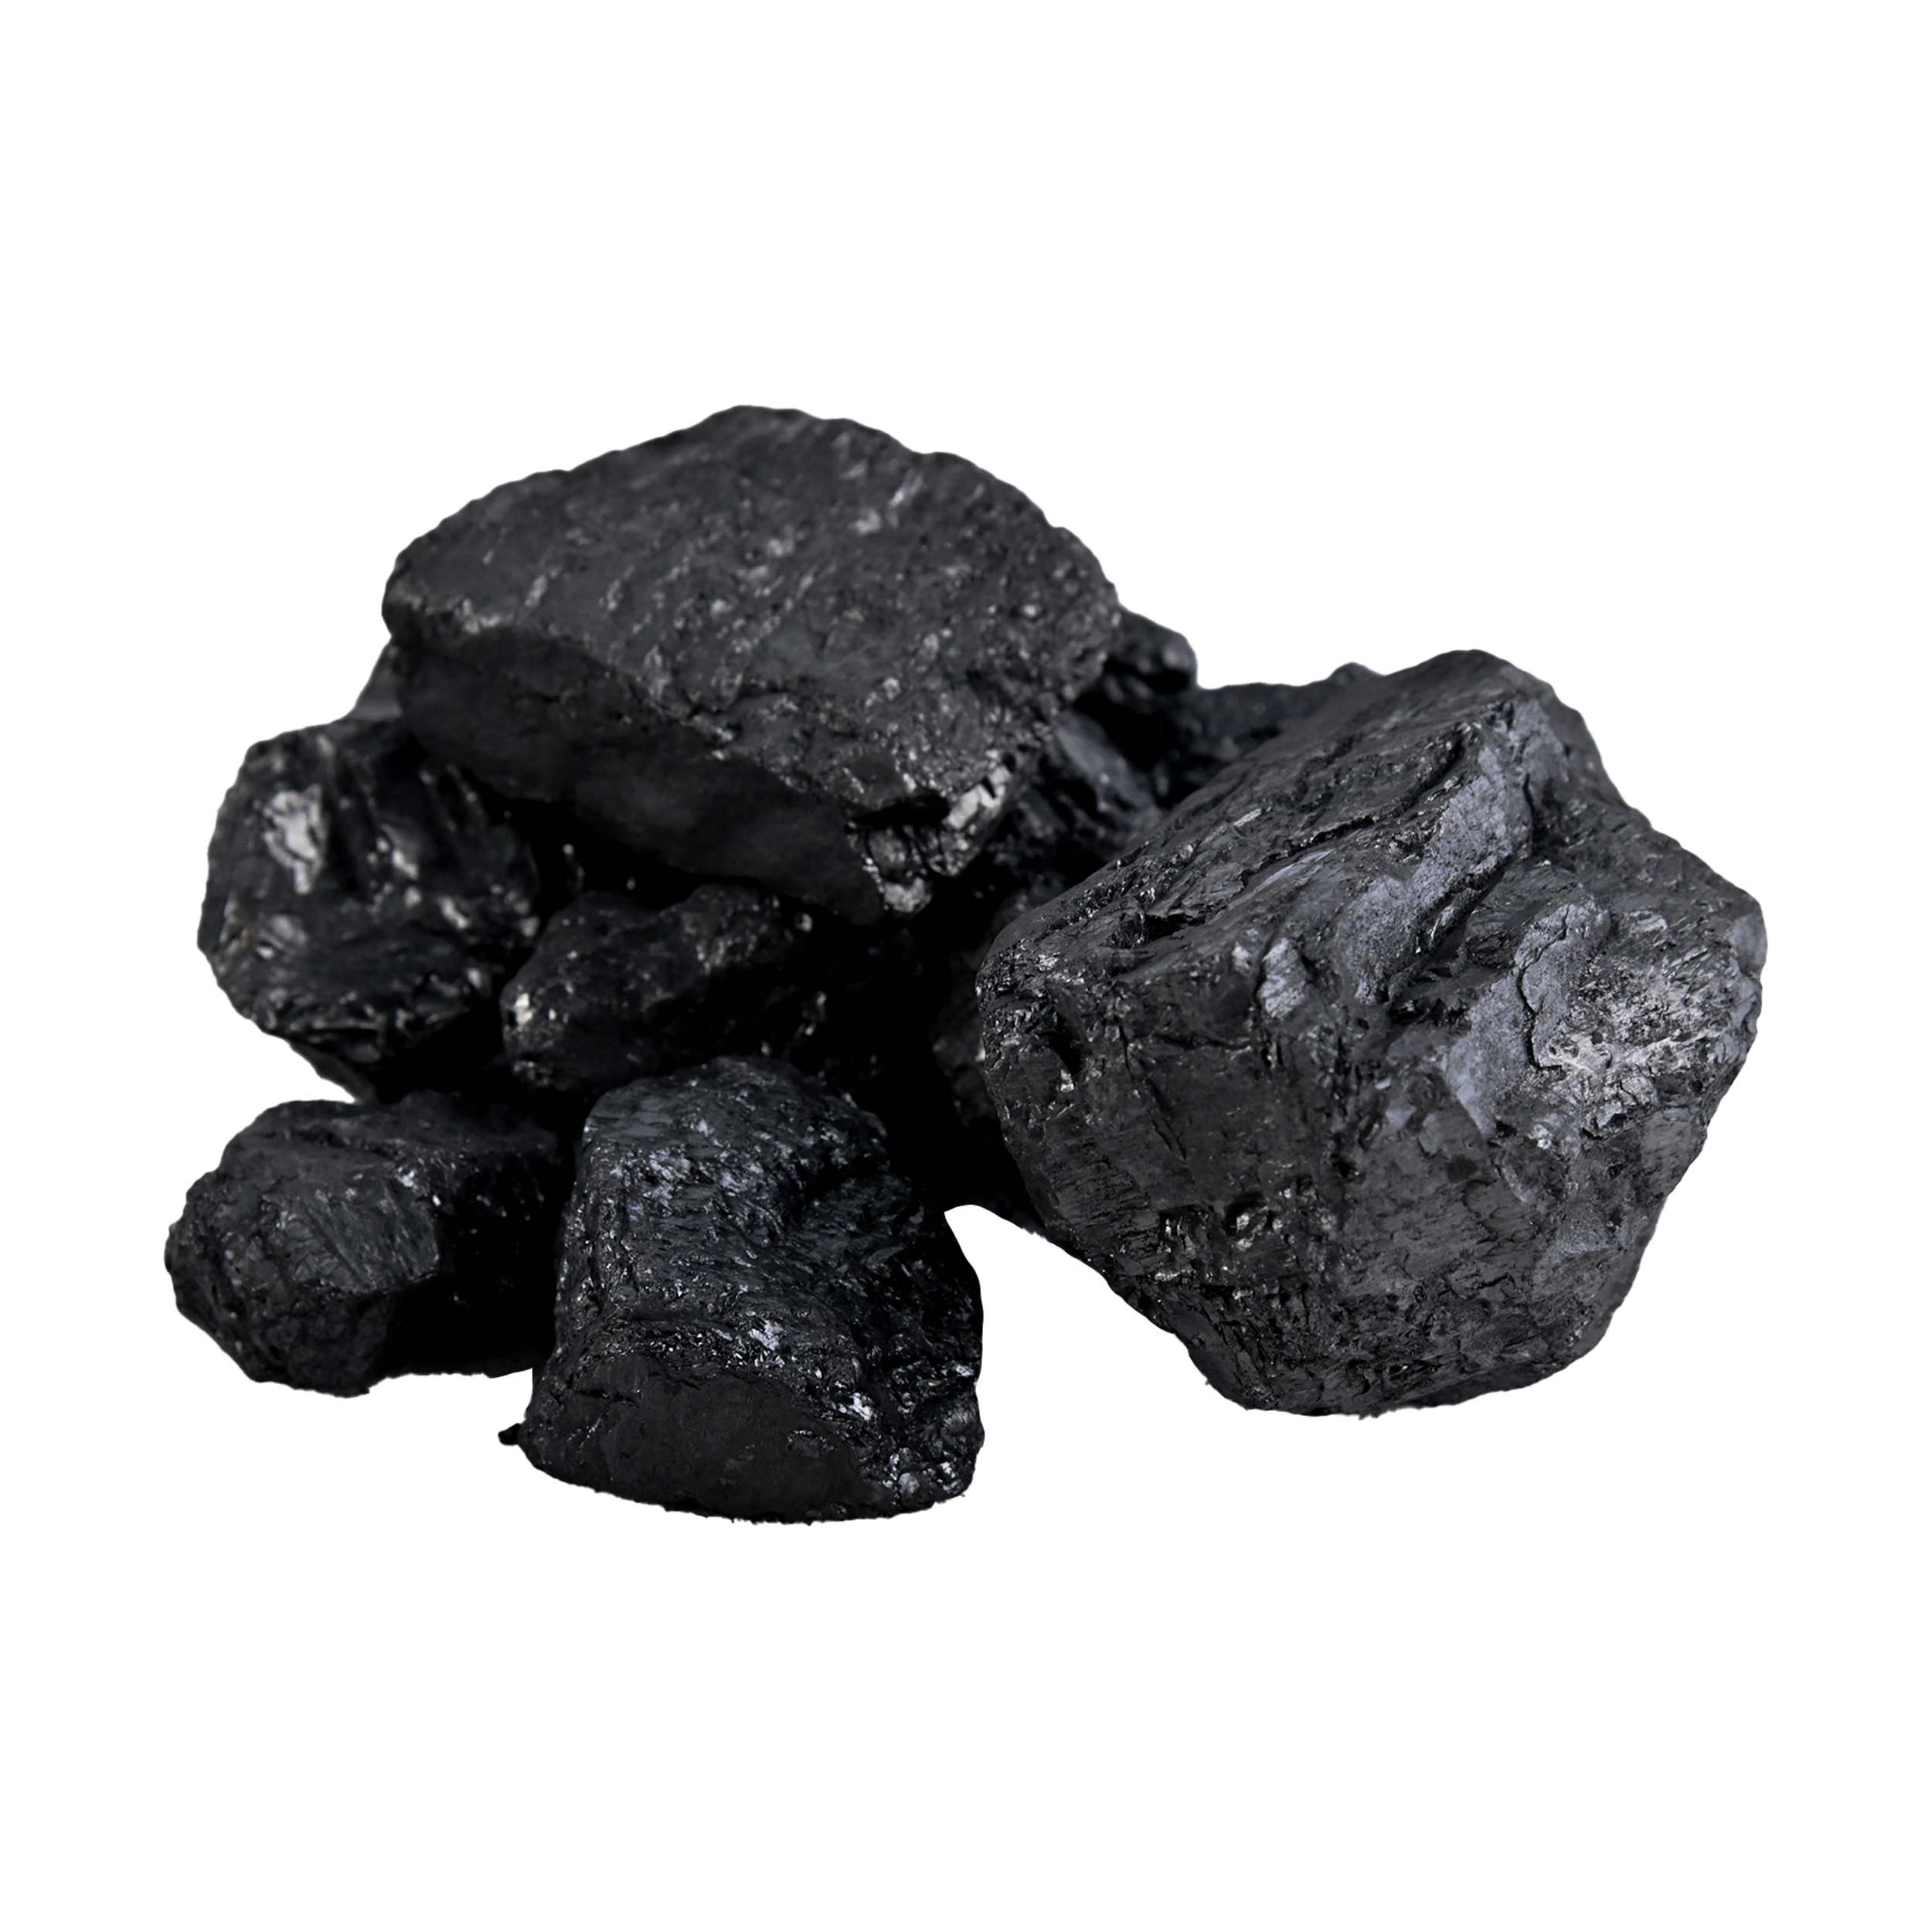 —Pngtree—coal construction industry_6326052.png